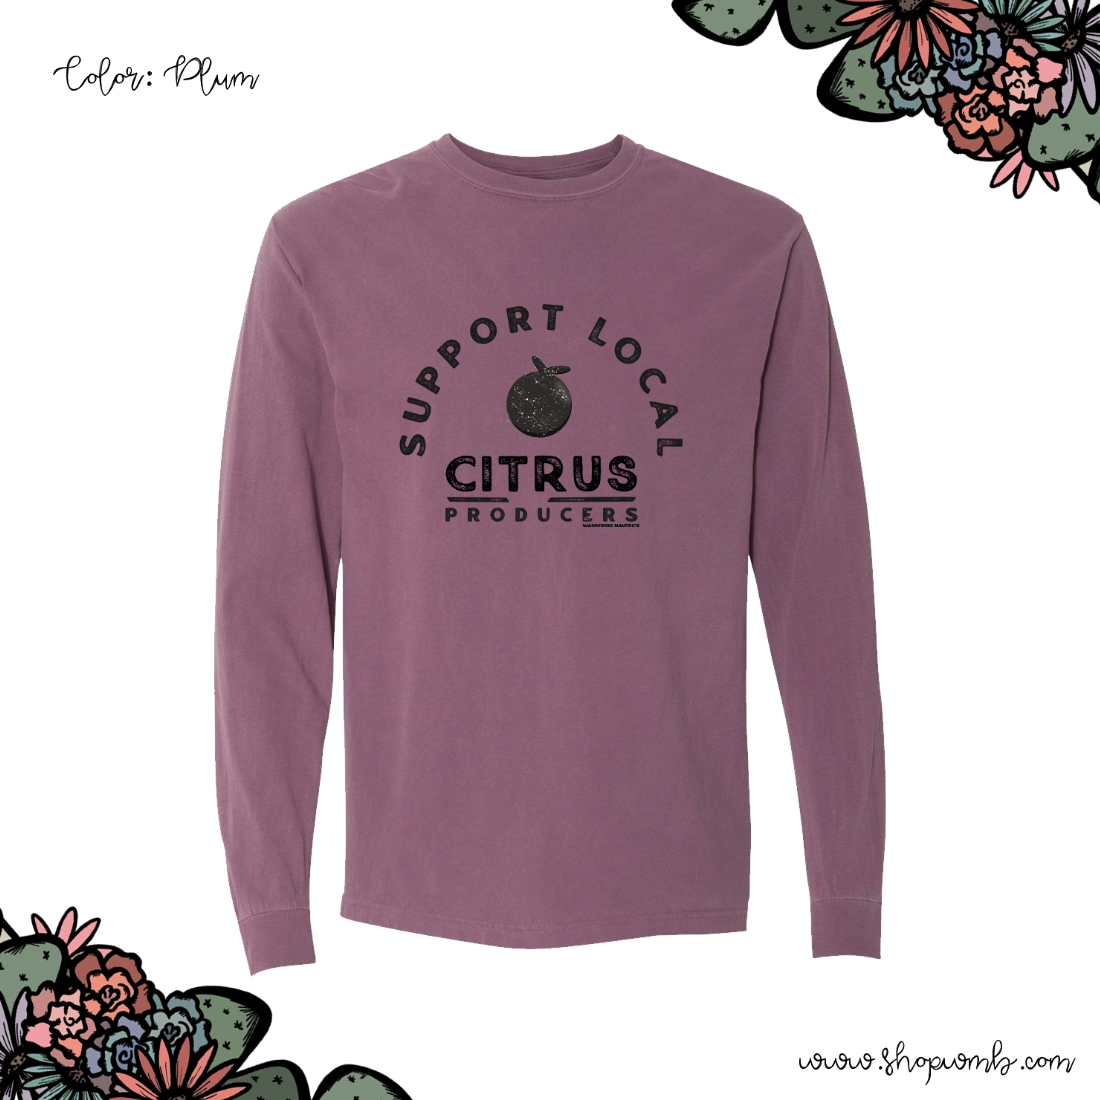 Support Local Citrus Producers LONG SLEEVE T-Shirt (S-3XL) - Multiple Colors!